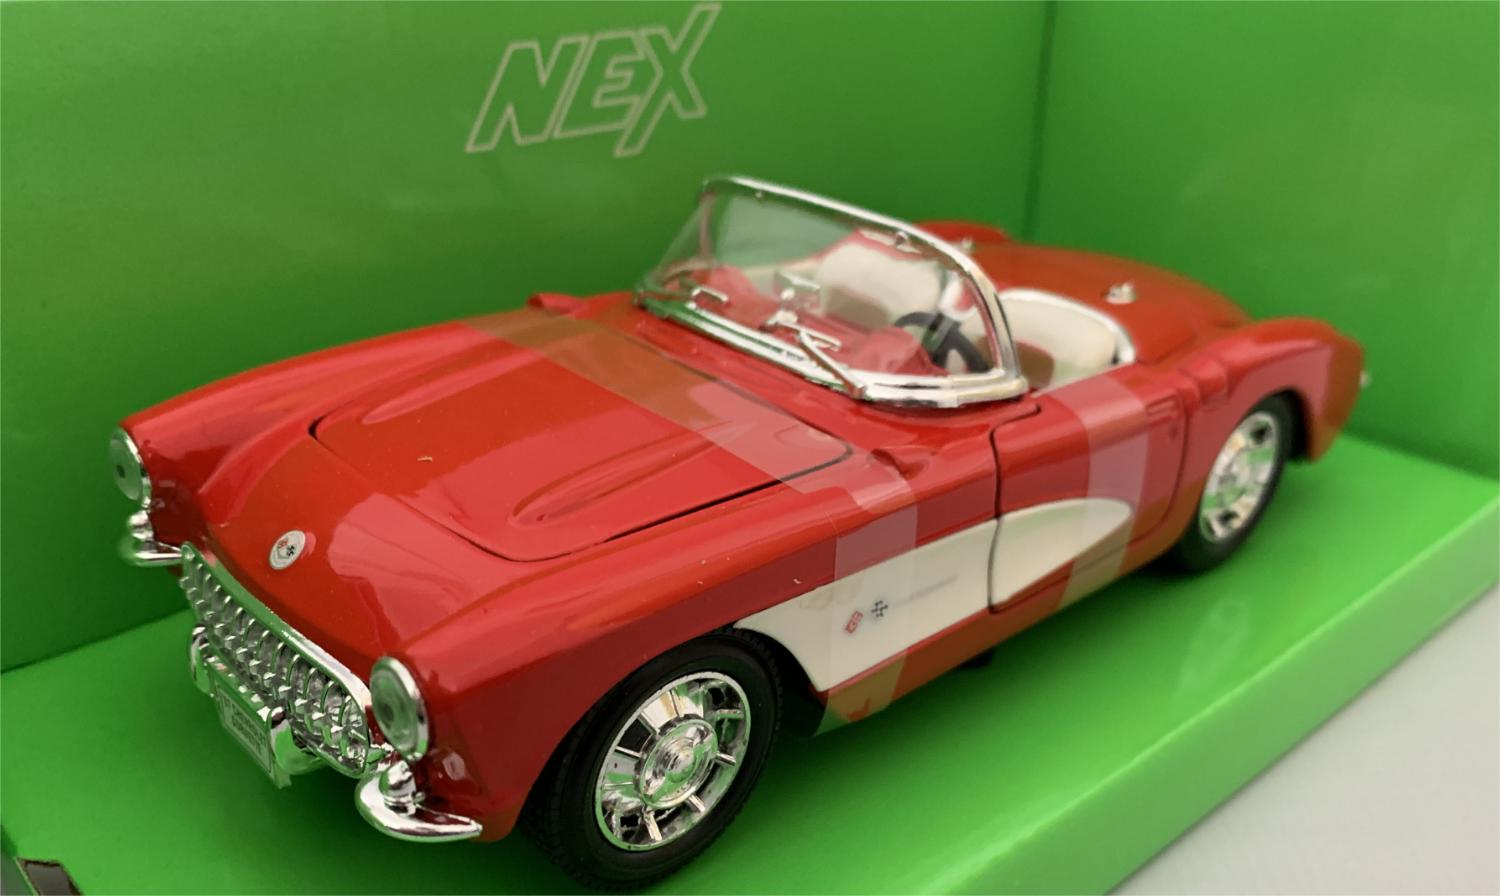 Chevrolet Corvette Convertible 1957 in red 1:24 scale model from Welly, WEL29393R